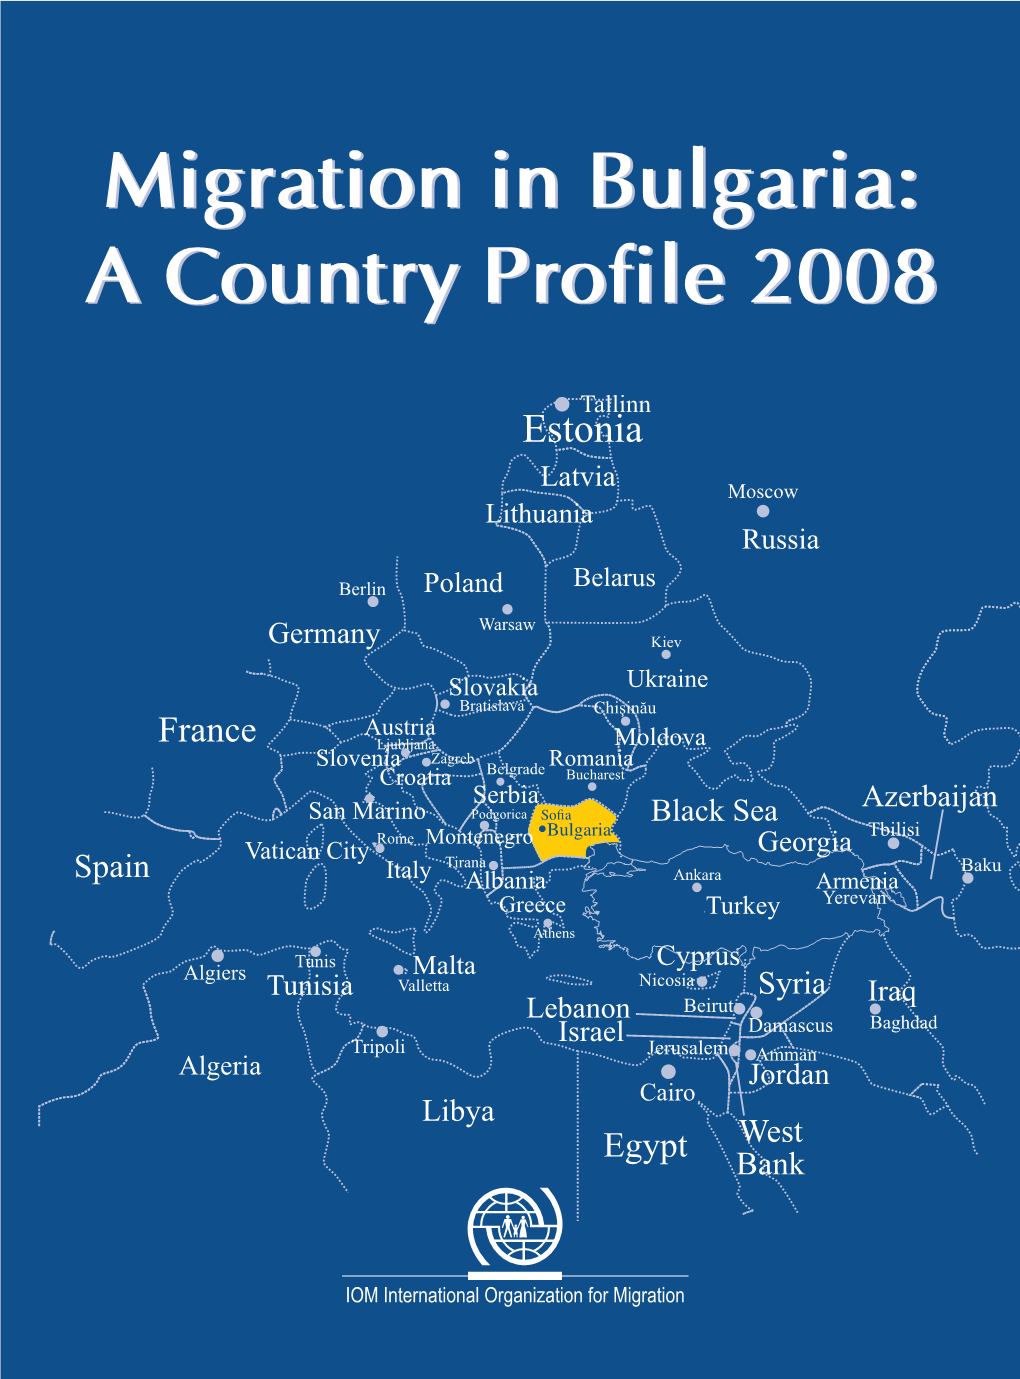 Migration in Bulgaria: a Country Profile